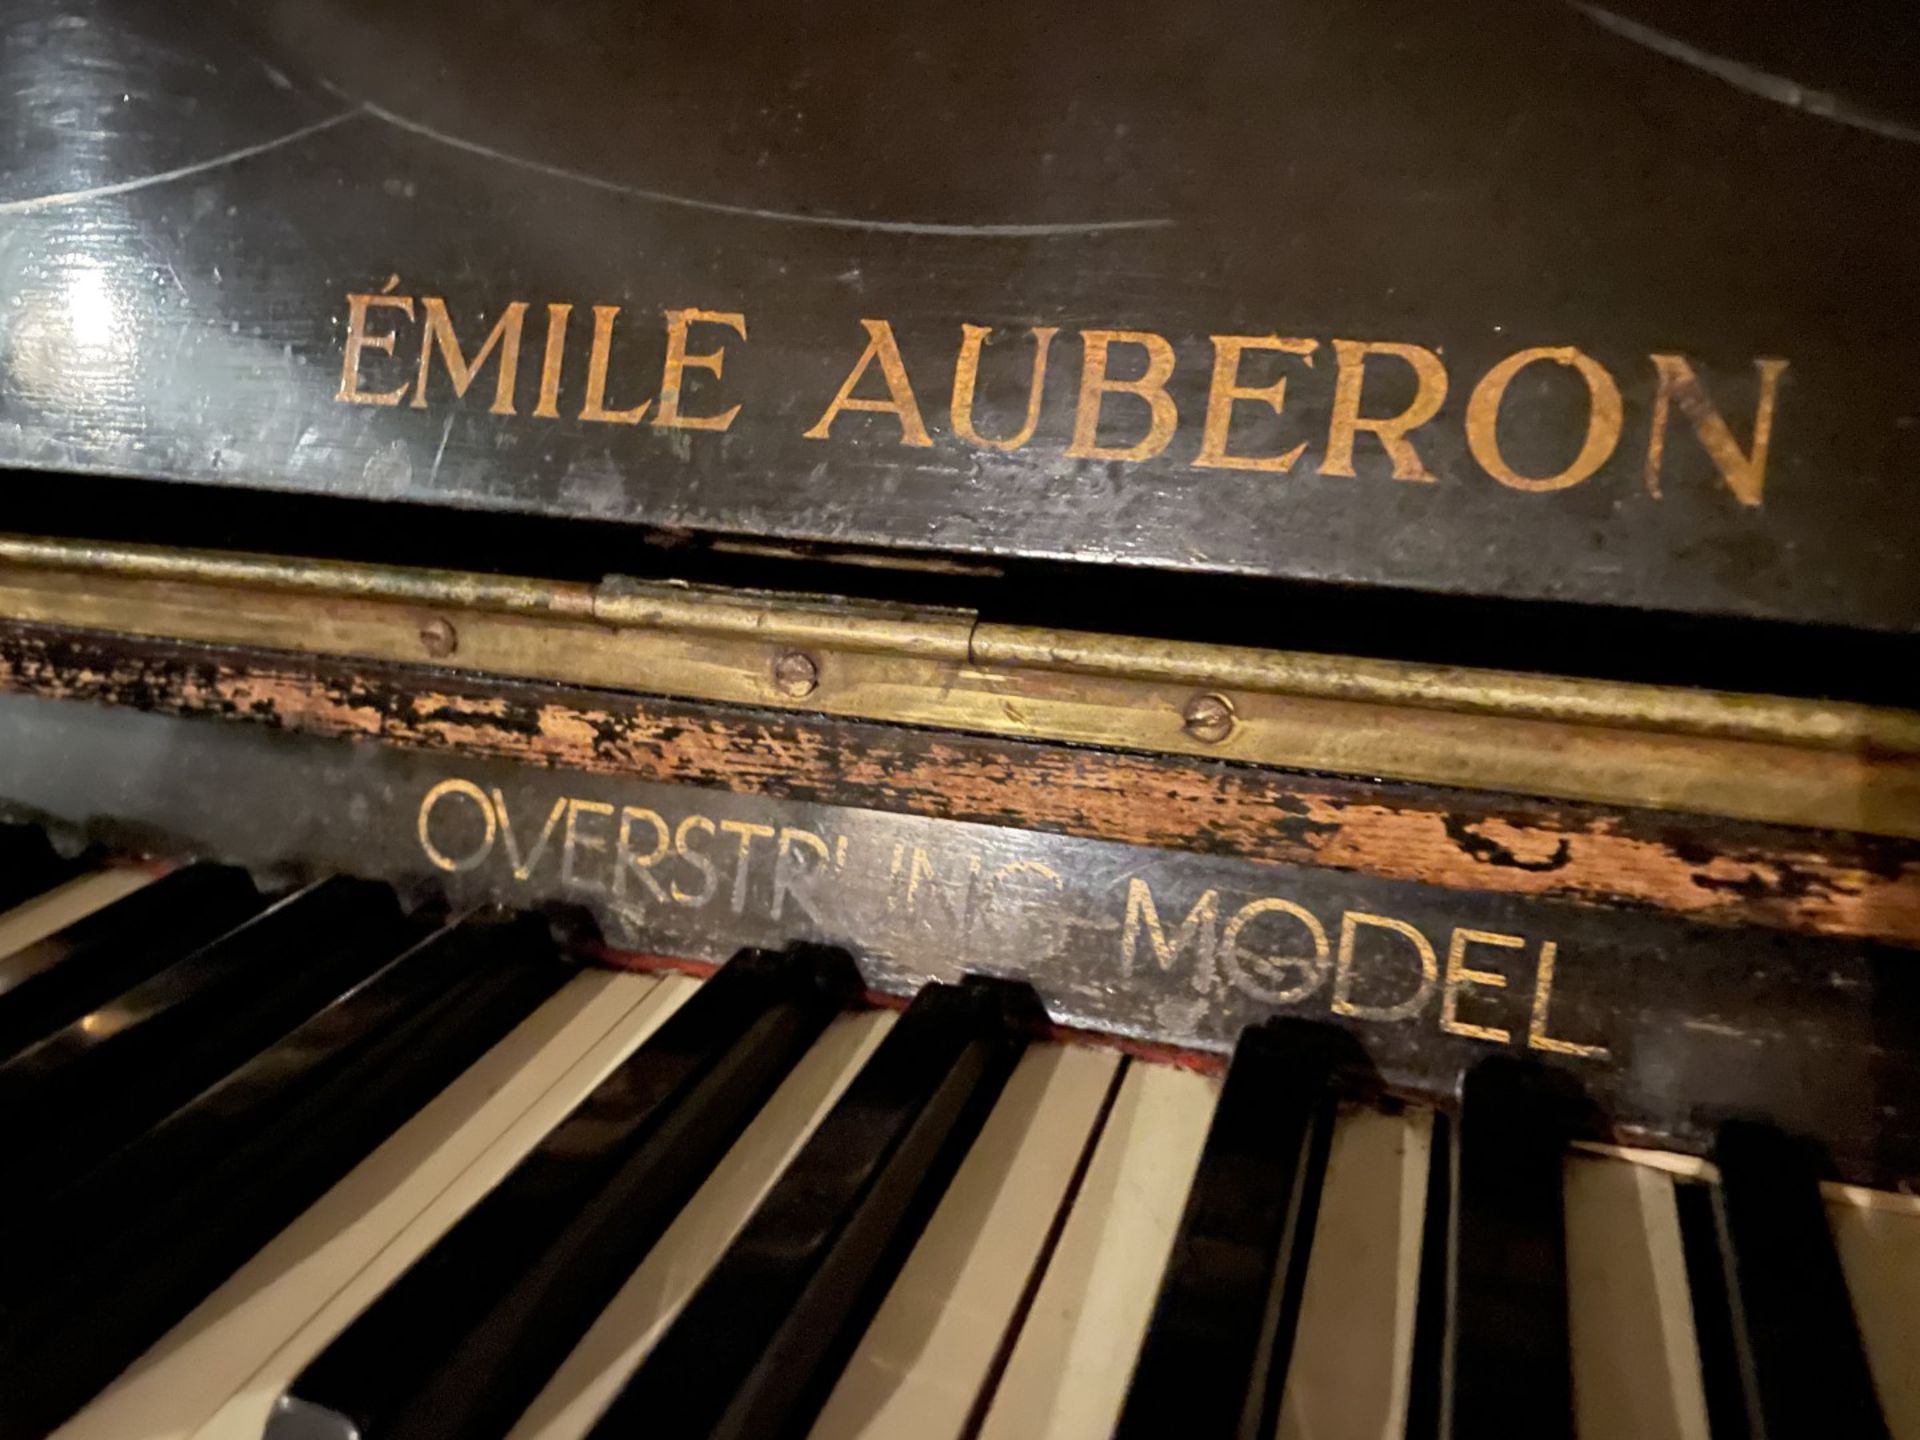 1 x Vintage EMILE AUBERON Mahogany Overstrung Upright Piano - Ref: 123 - CL909 - Location: London, - Image 7 of 13